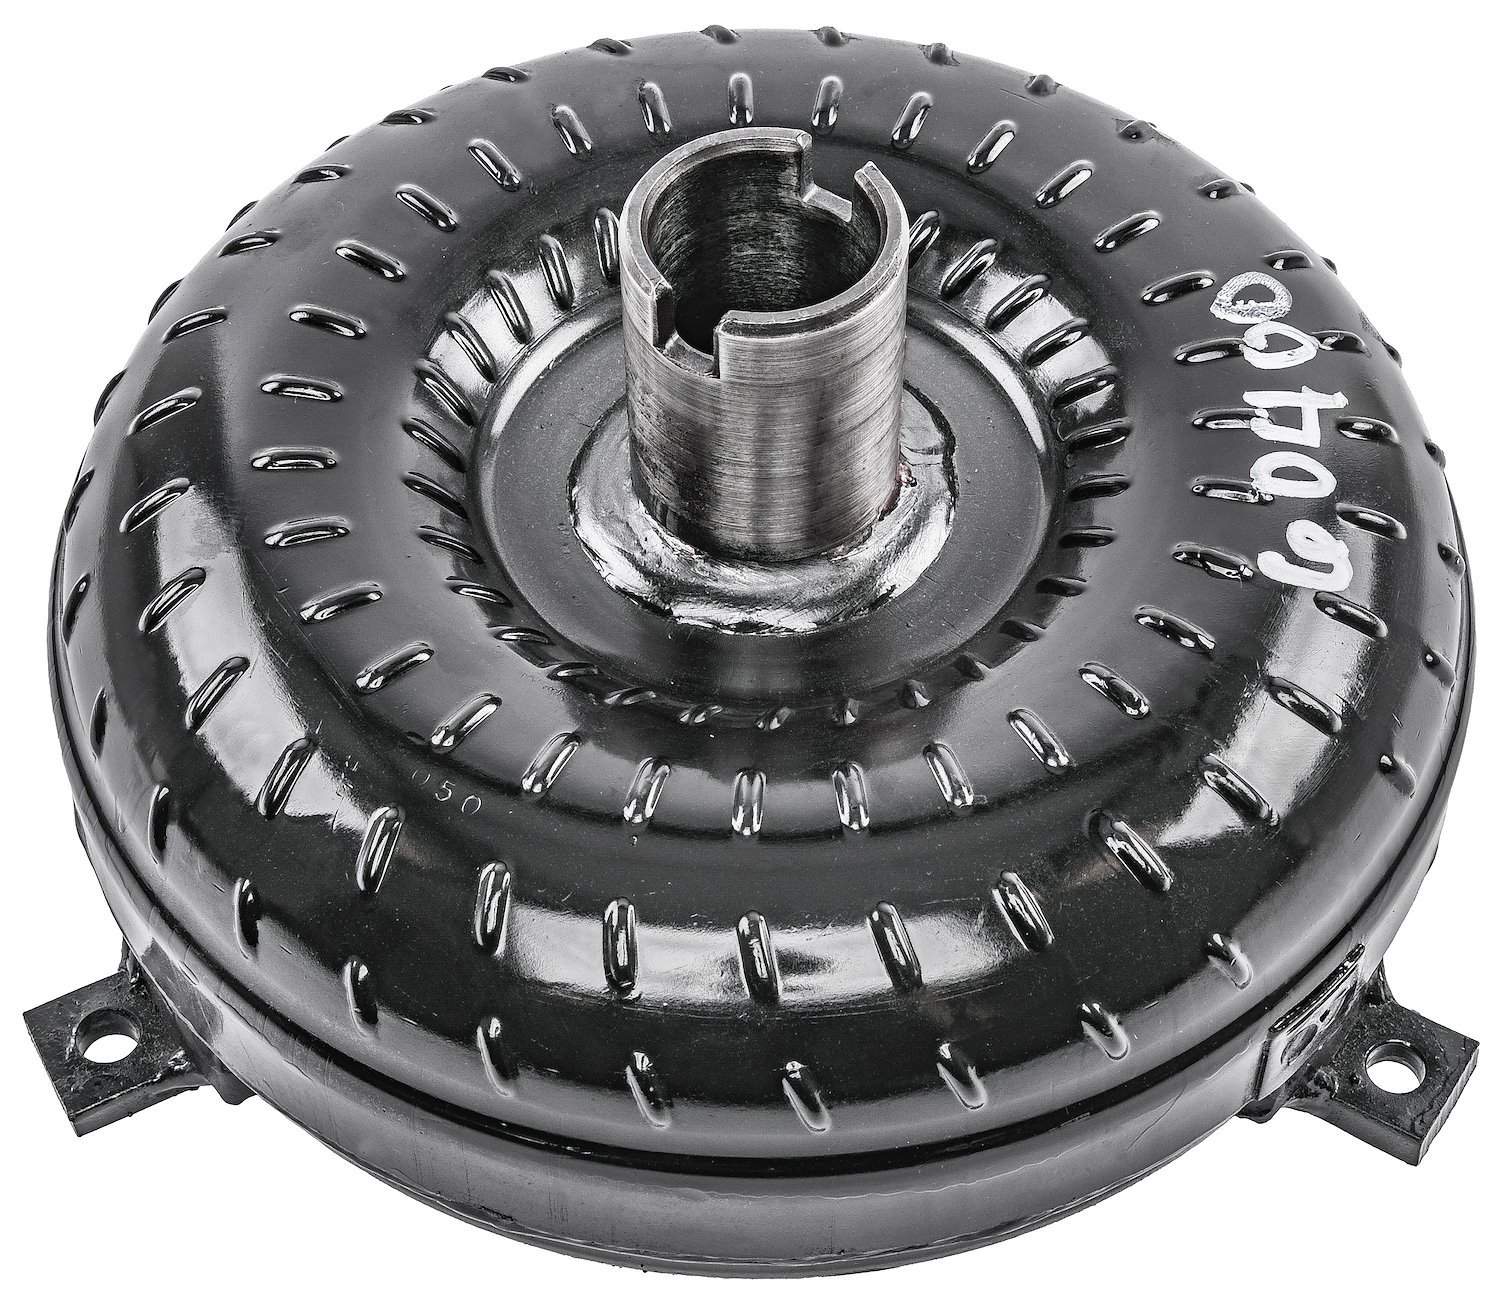 Details about   The Rop ShopBlack Torque Converter Clutch With Aluminum Mounting Bracket Plat 